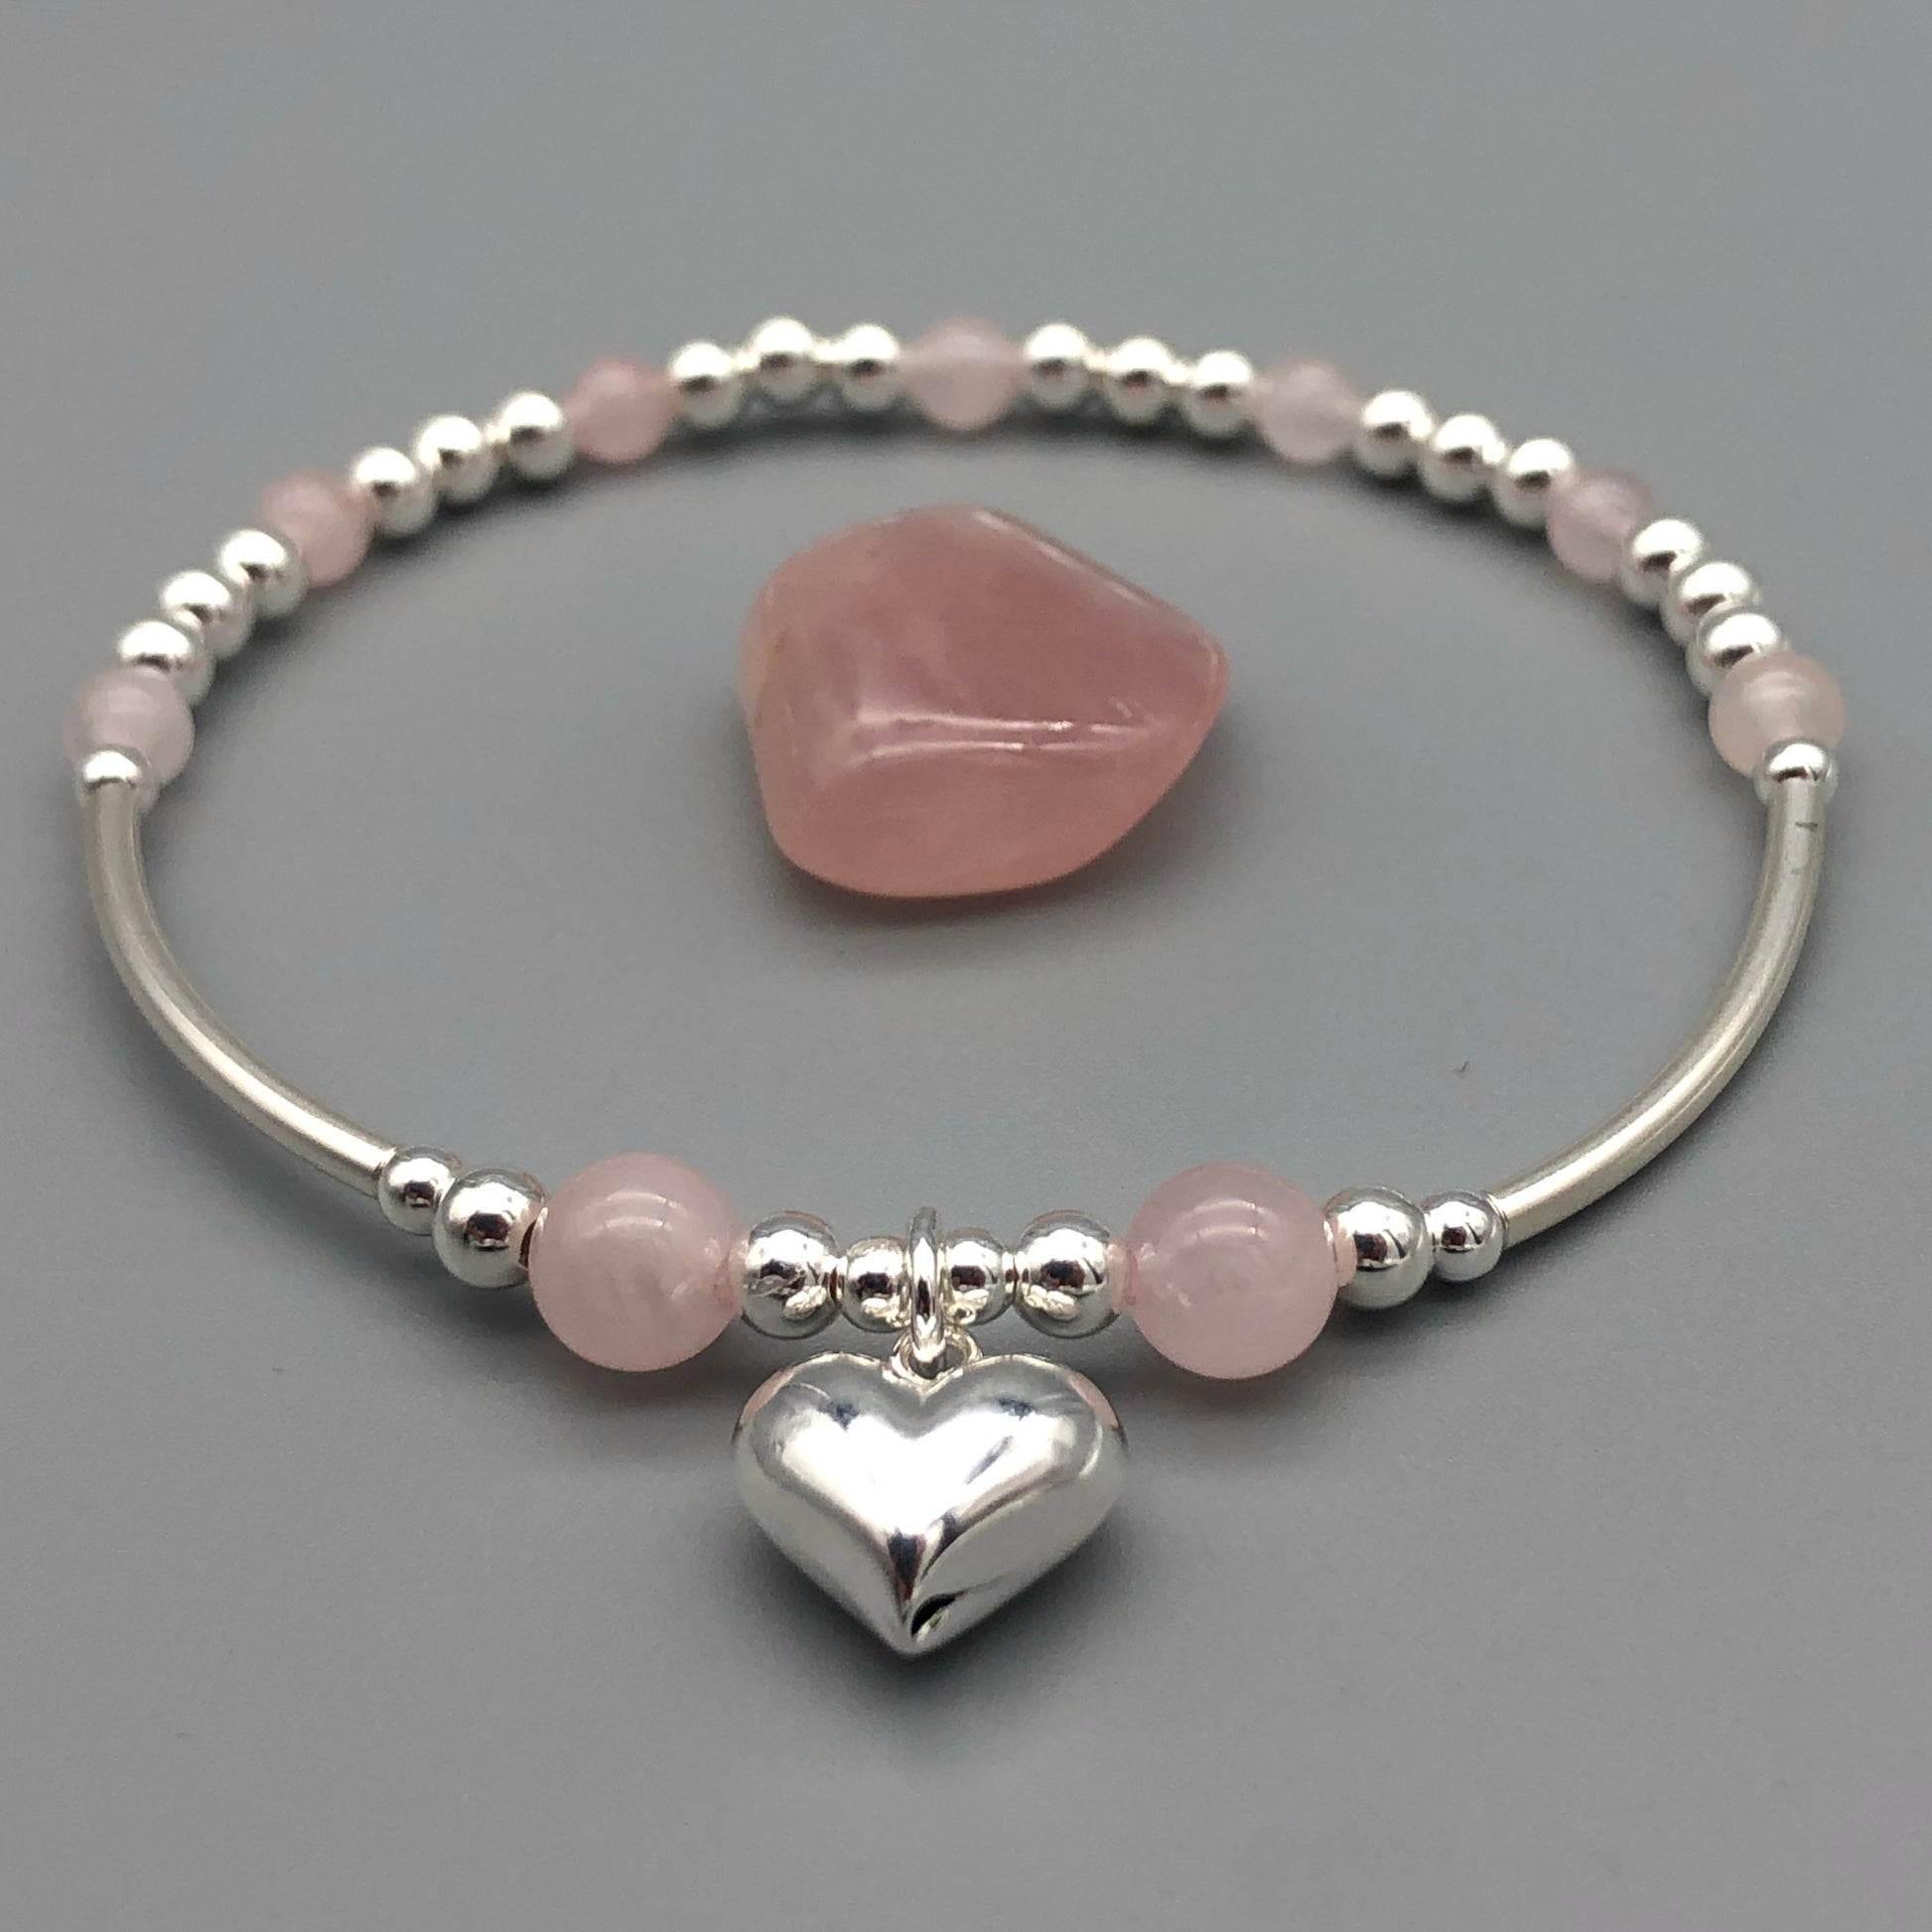 Clseup of Rose quartz puff heart charm sterling silver women's stacking bracelet by My Silver Wish